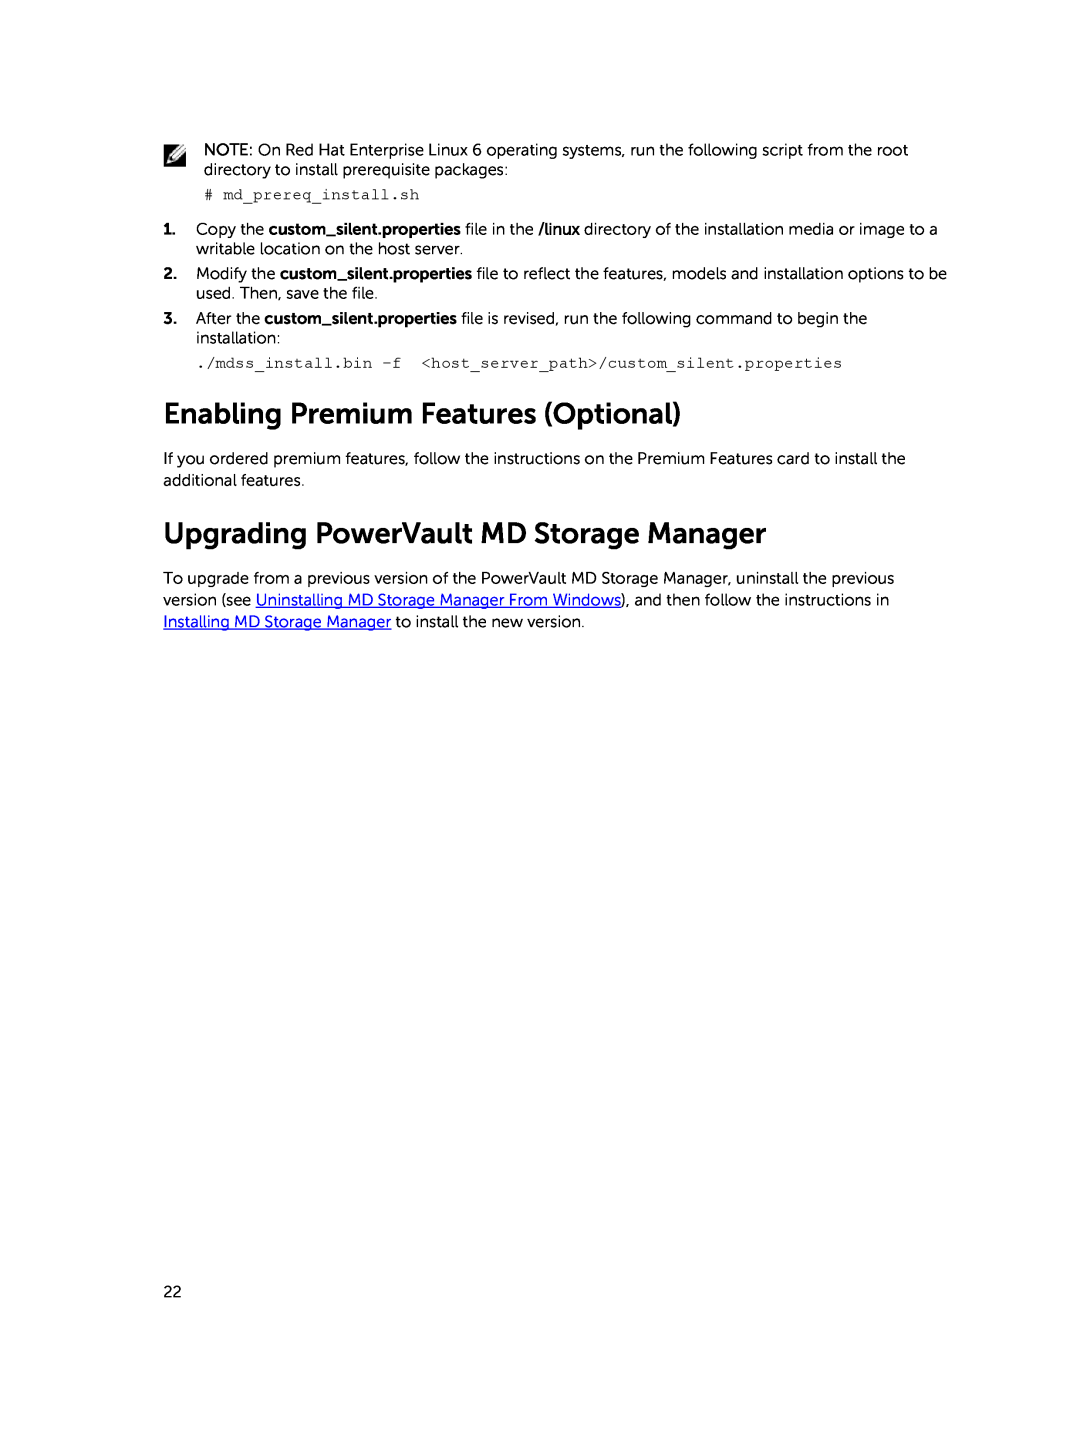 Dell MD3460 manual Enabling Premium Features Optional, Upgrading PowerVault MD Storage Manager 